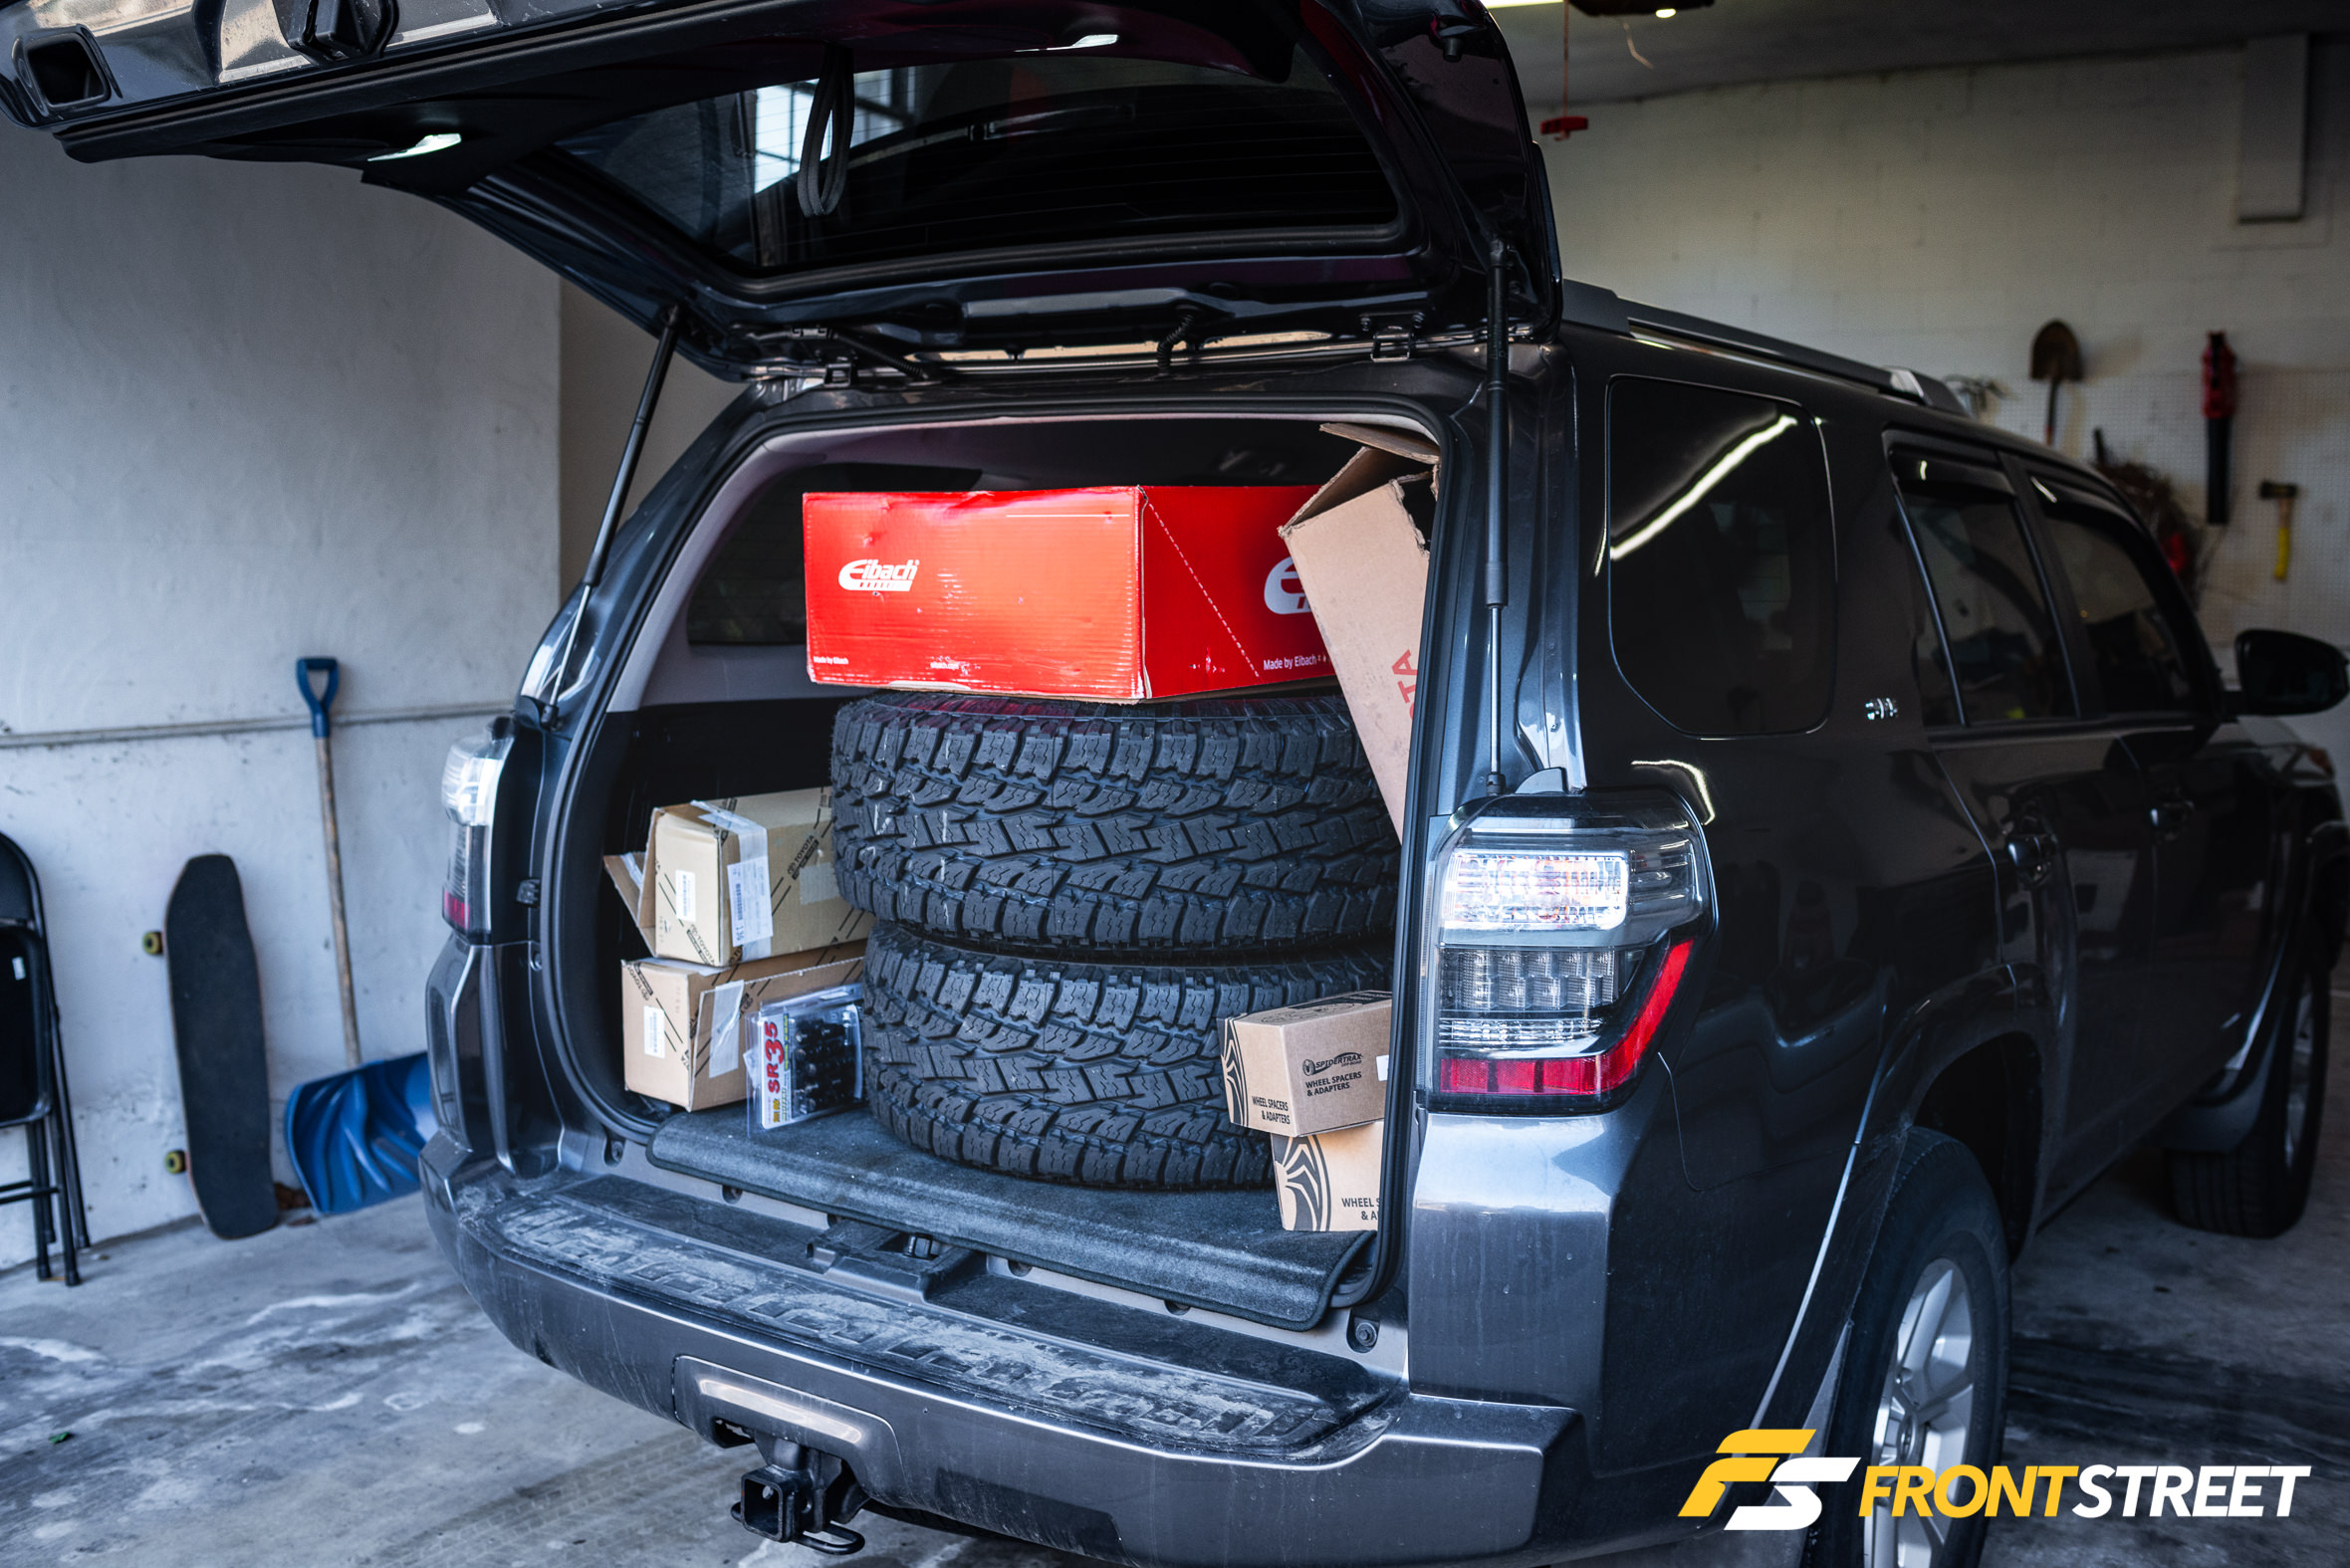 This Is How We Do It: Upgrading Toyota's 4Runner For Off-Road Fun